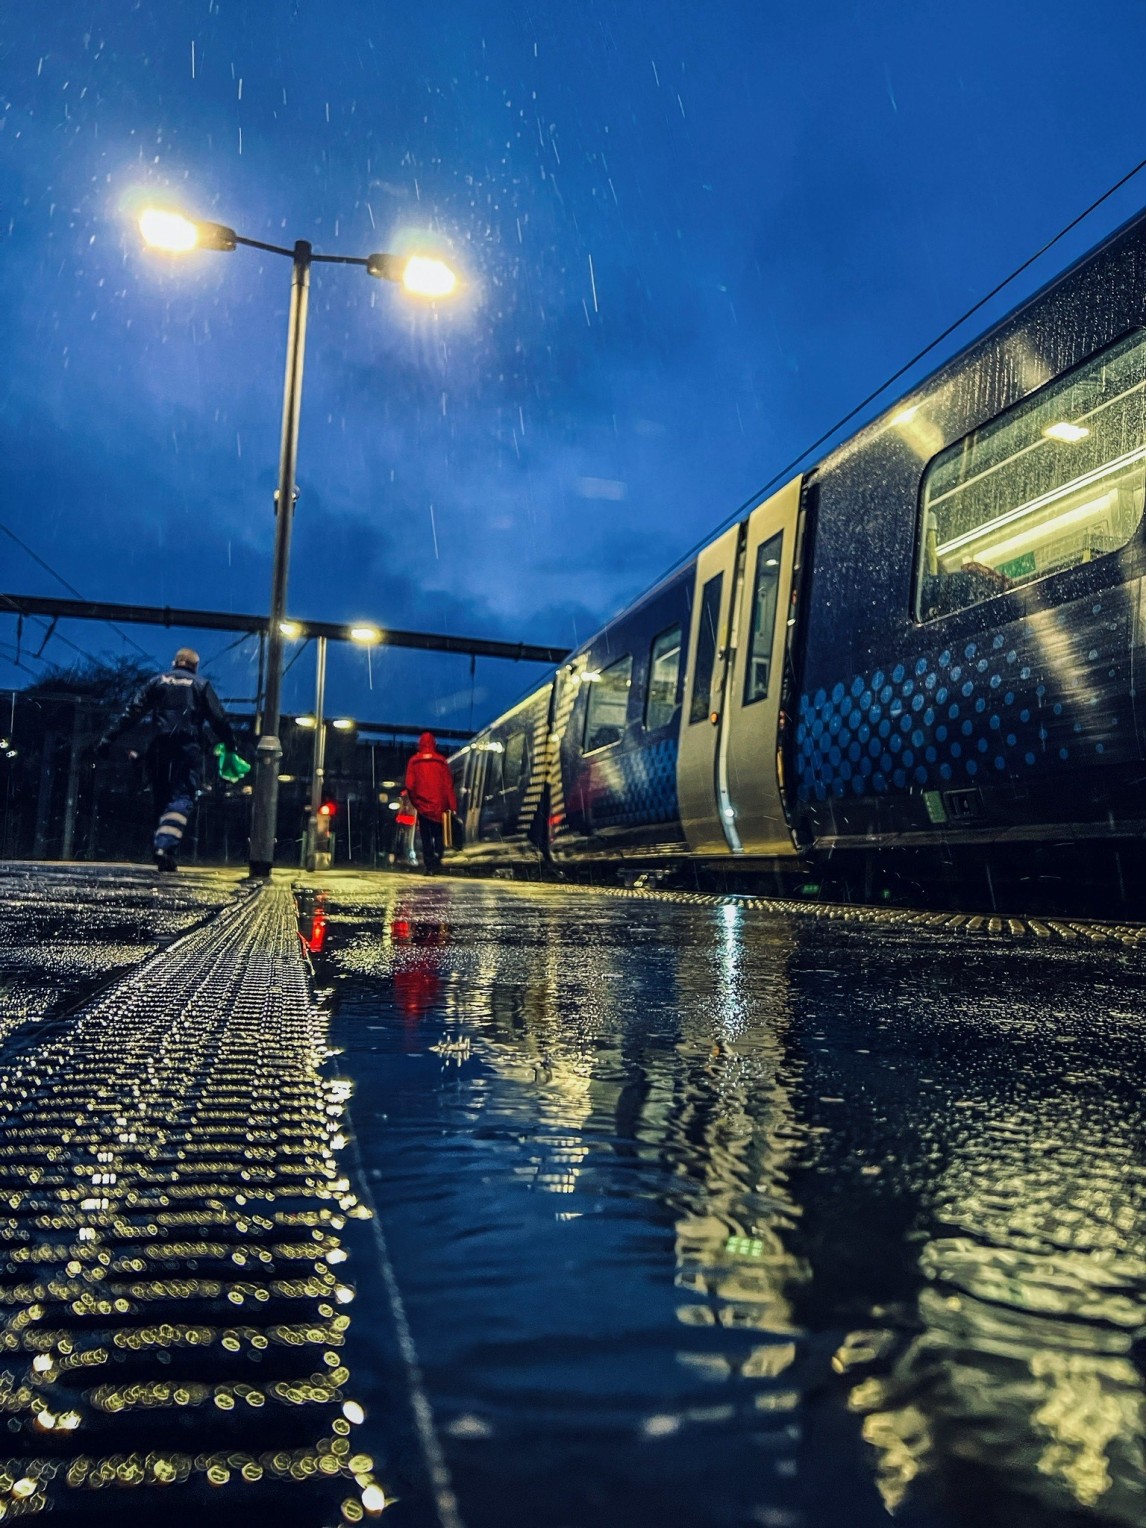 A low angle shot of people boarding a ScotRail train on a rainy day.